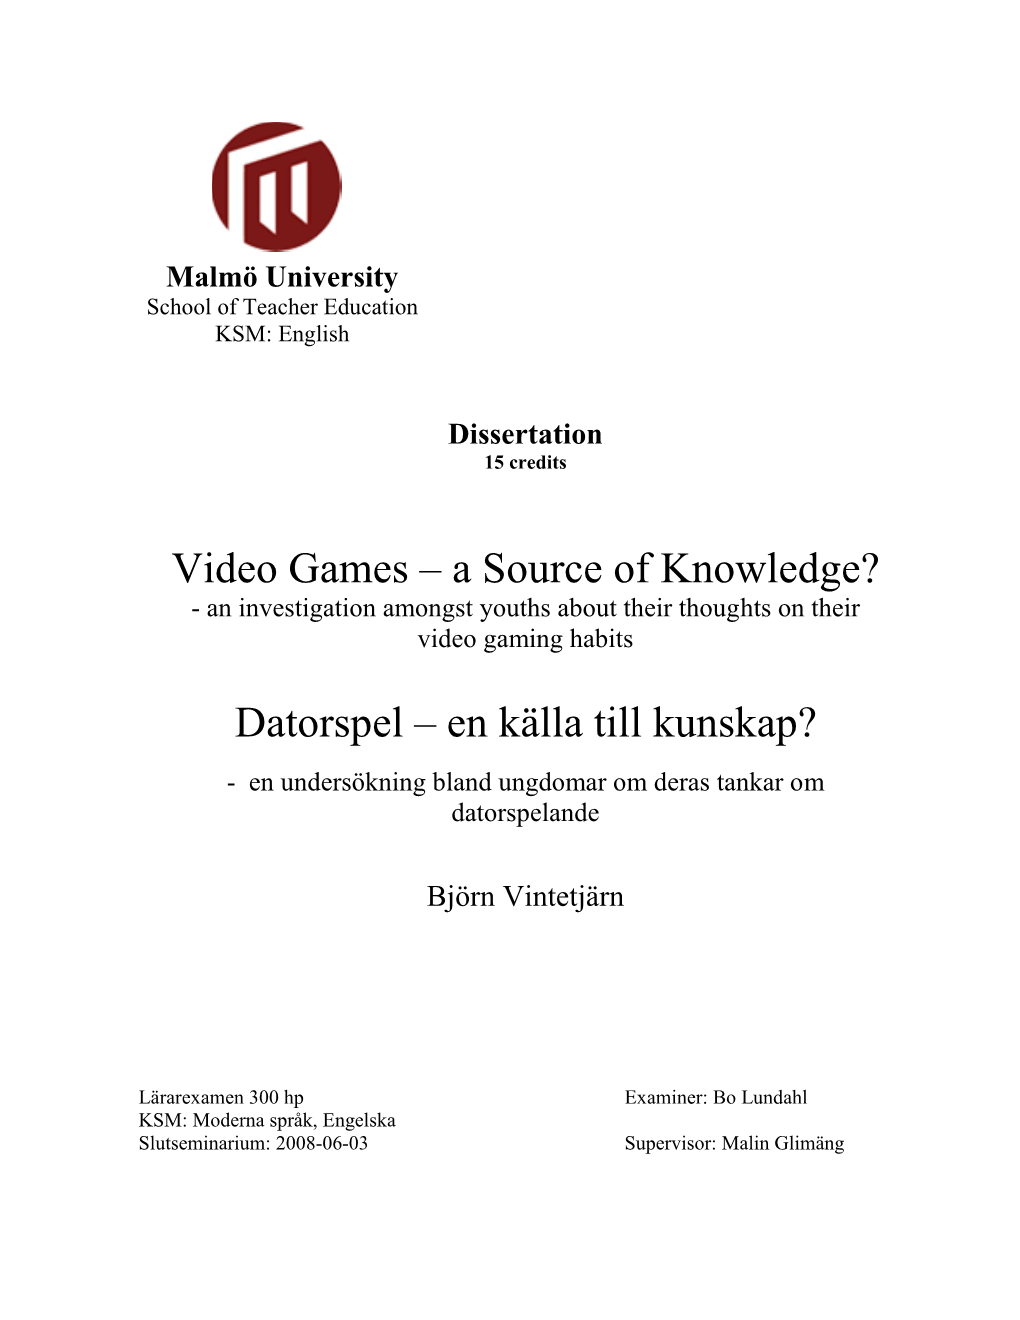 Video Games – a Source of Knowledge? - an Investigation Amongst Youths About Their Thoughts on Their Video Gaming Habits